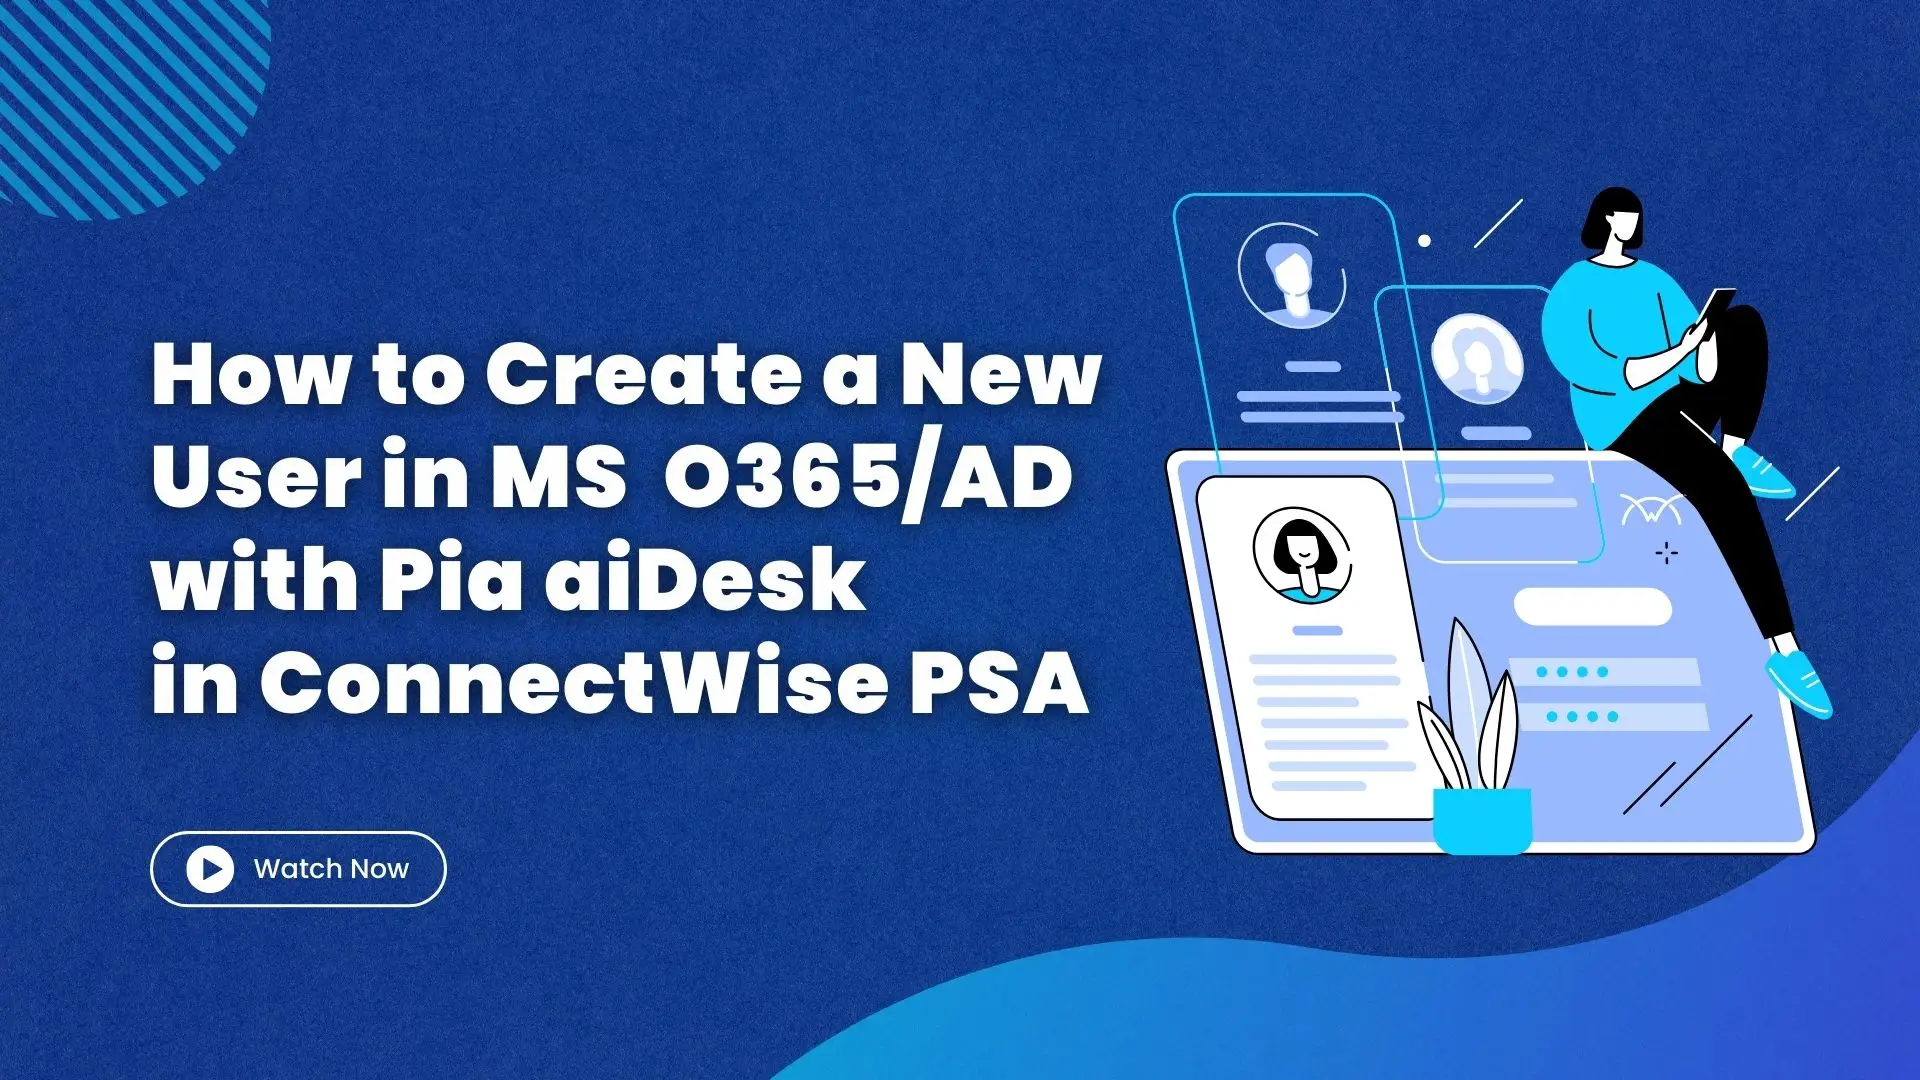 How to create a new user in Microsoft O365/AD with Pia aiDesk in ConnectWise PSA